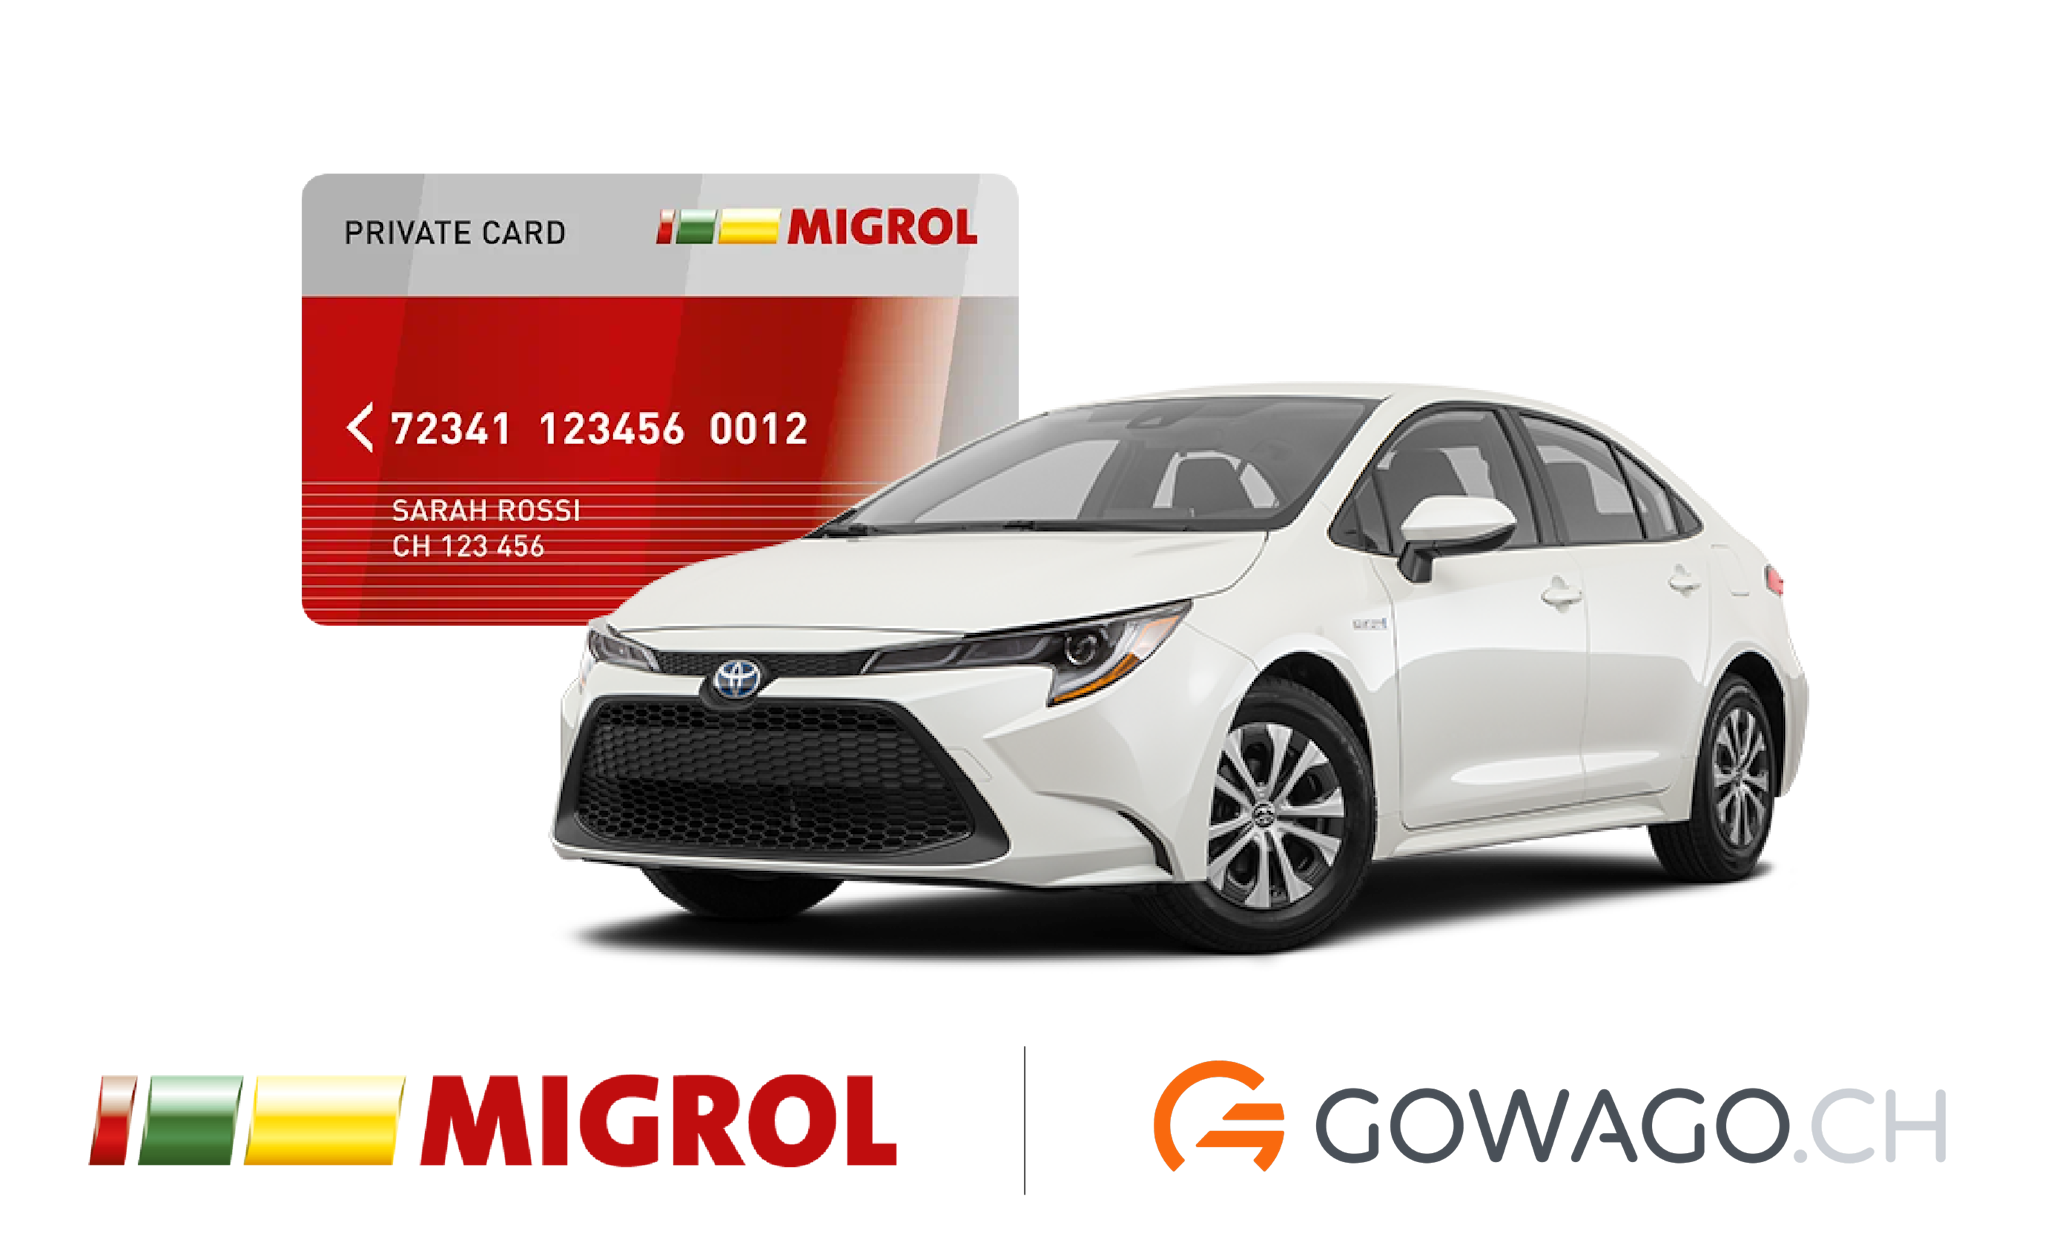 blog item card - Discover the many advantages of the Migrolcard at gowago.ch: discounts on fuel, car wash, and more.